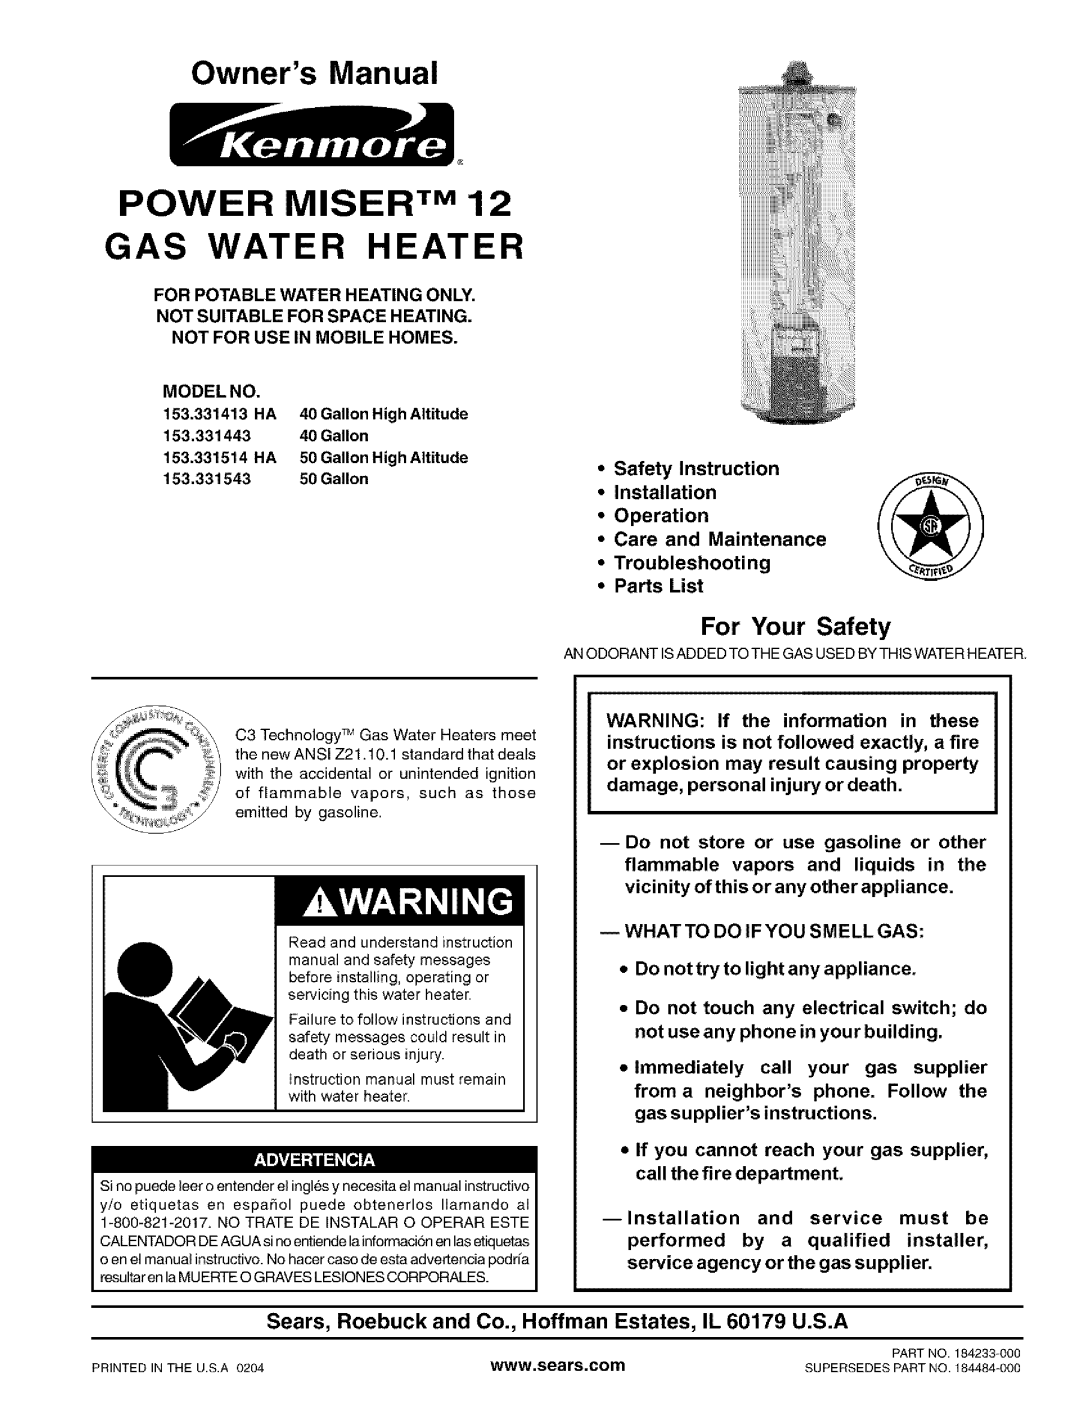 Kenmore 153.331413 HA owner manual Power Miser Tm Gas Water Heater, For Your Safety, Not For Use In Mobile Homes 